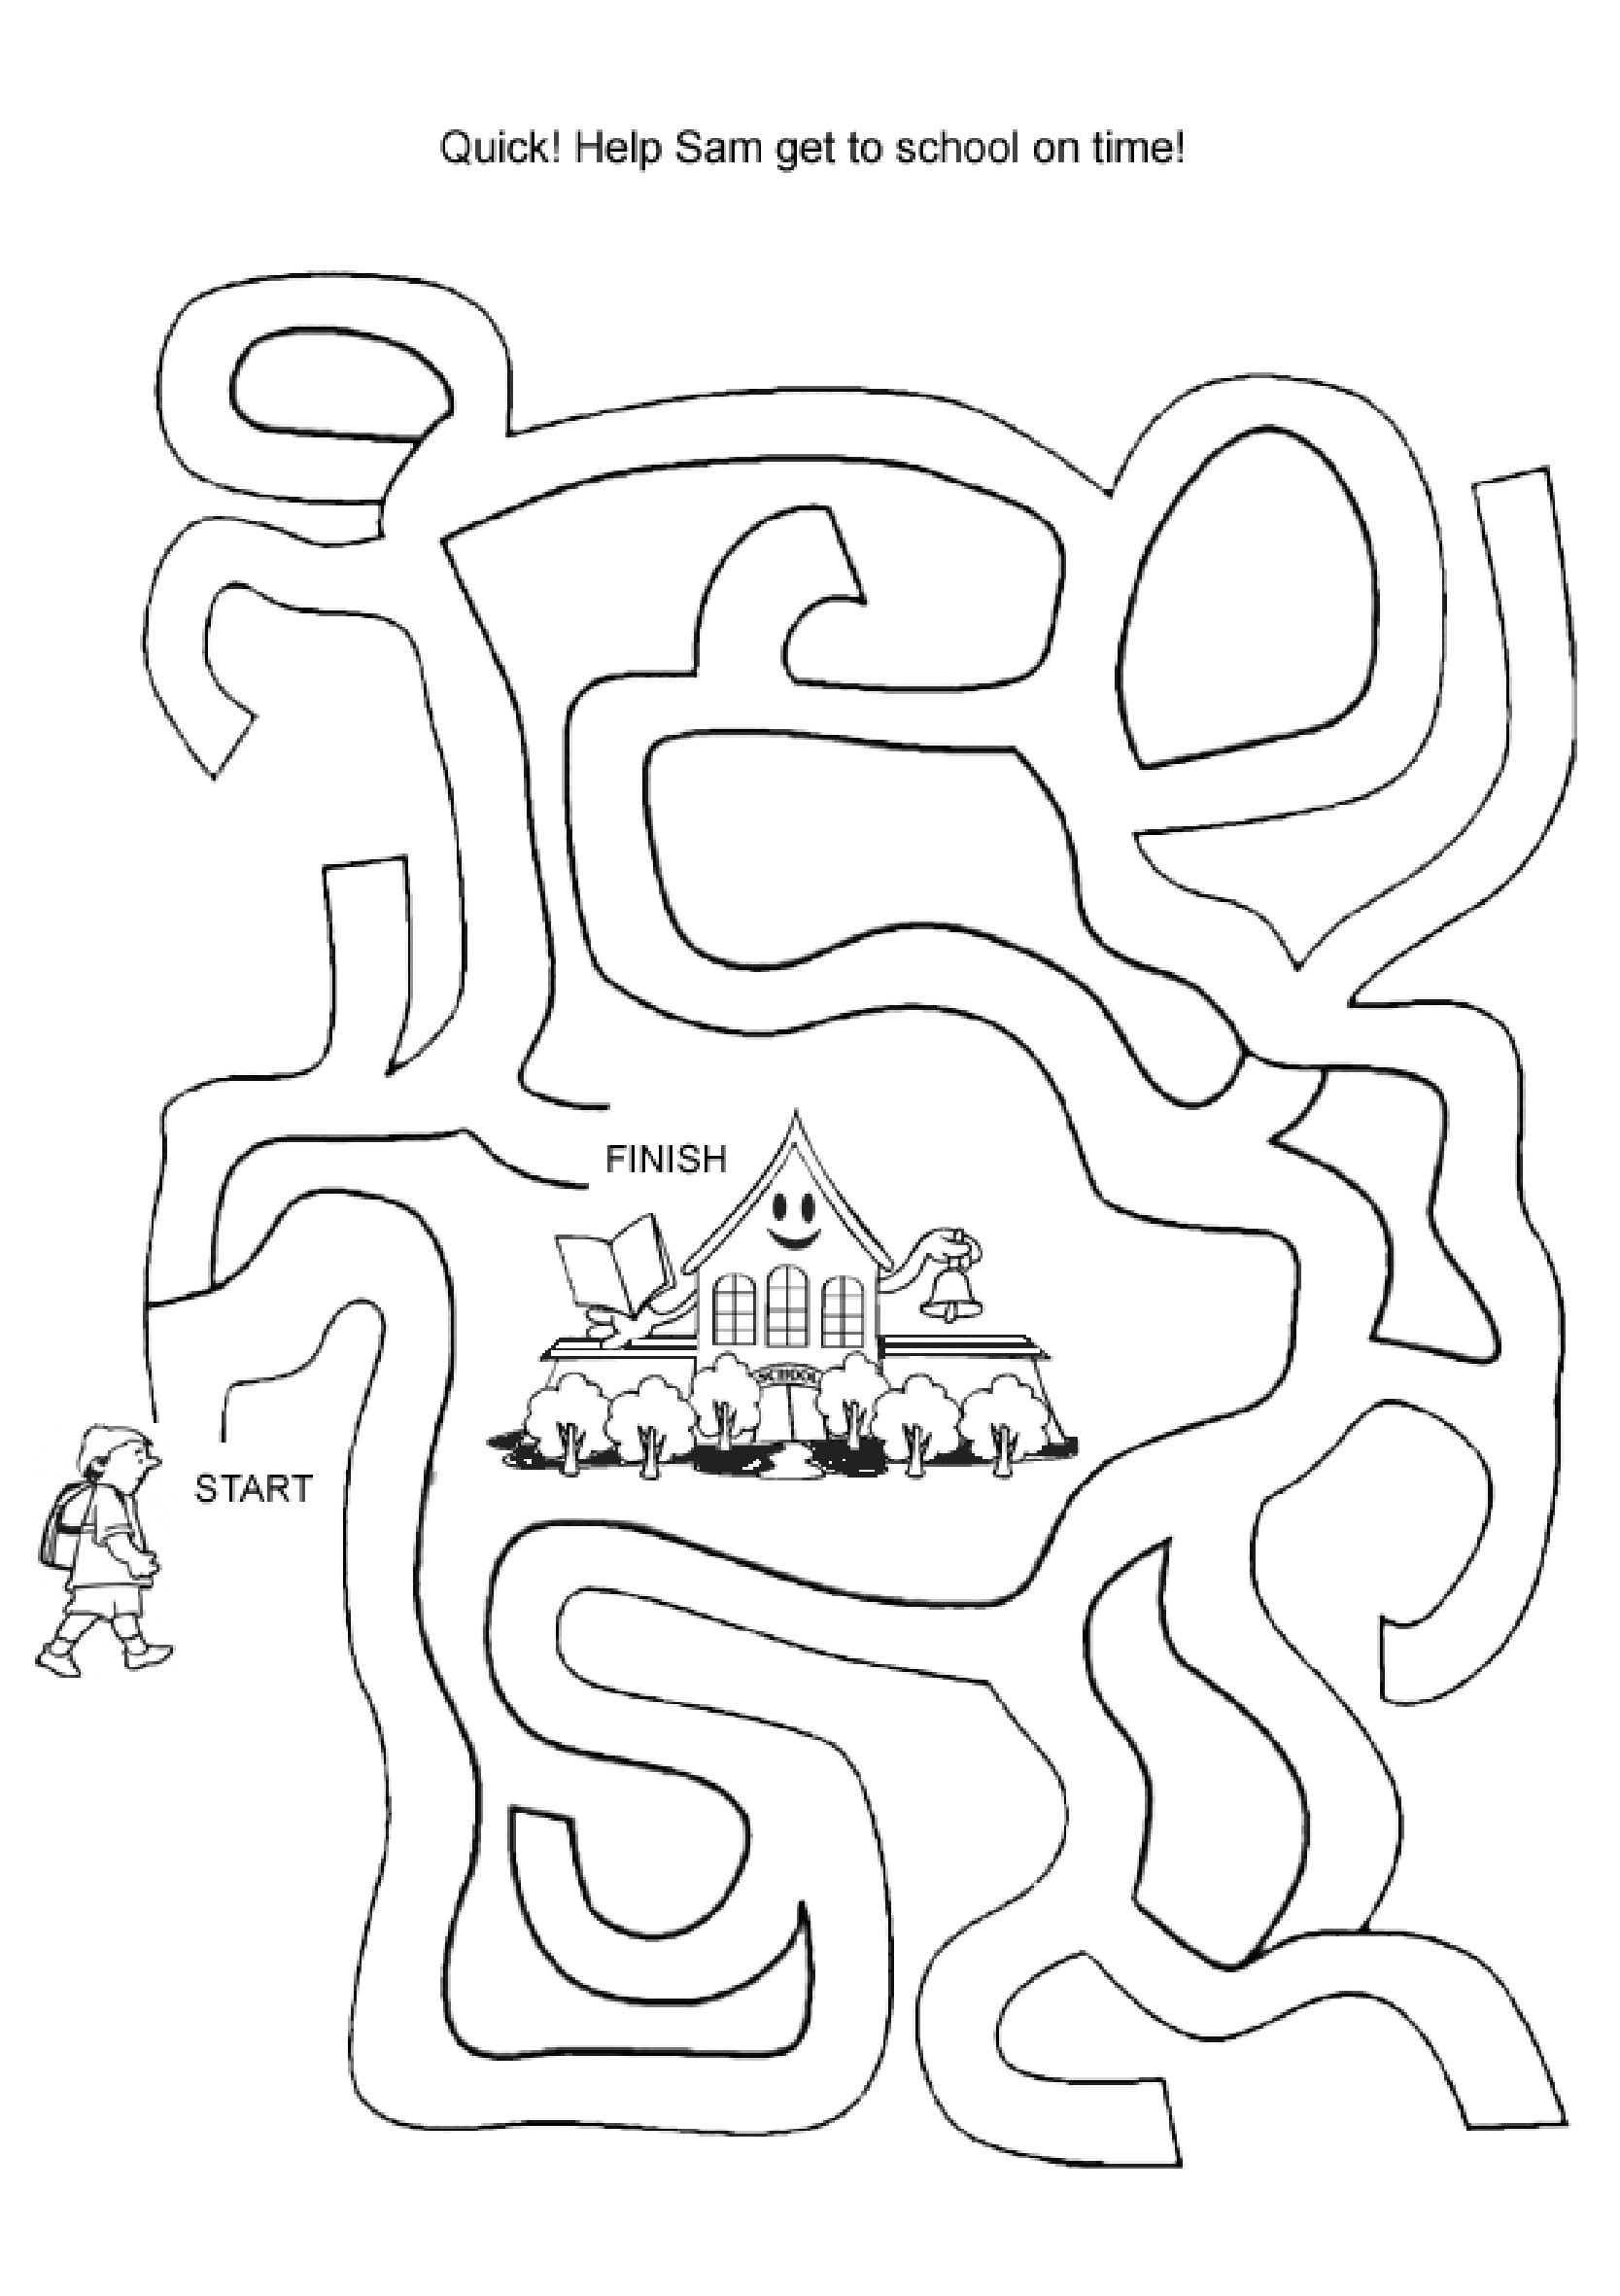 easy mazes printable mazes for kids best coloring pages for kids